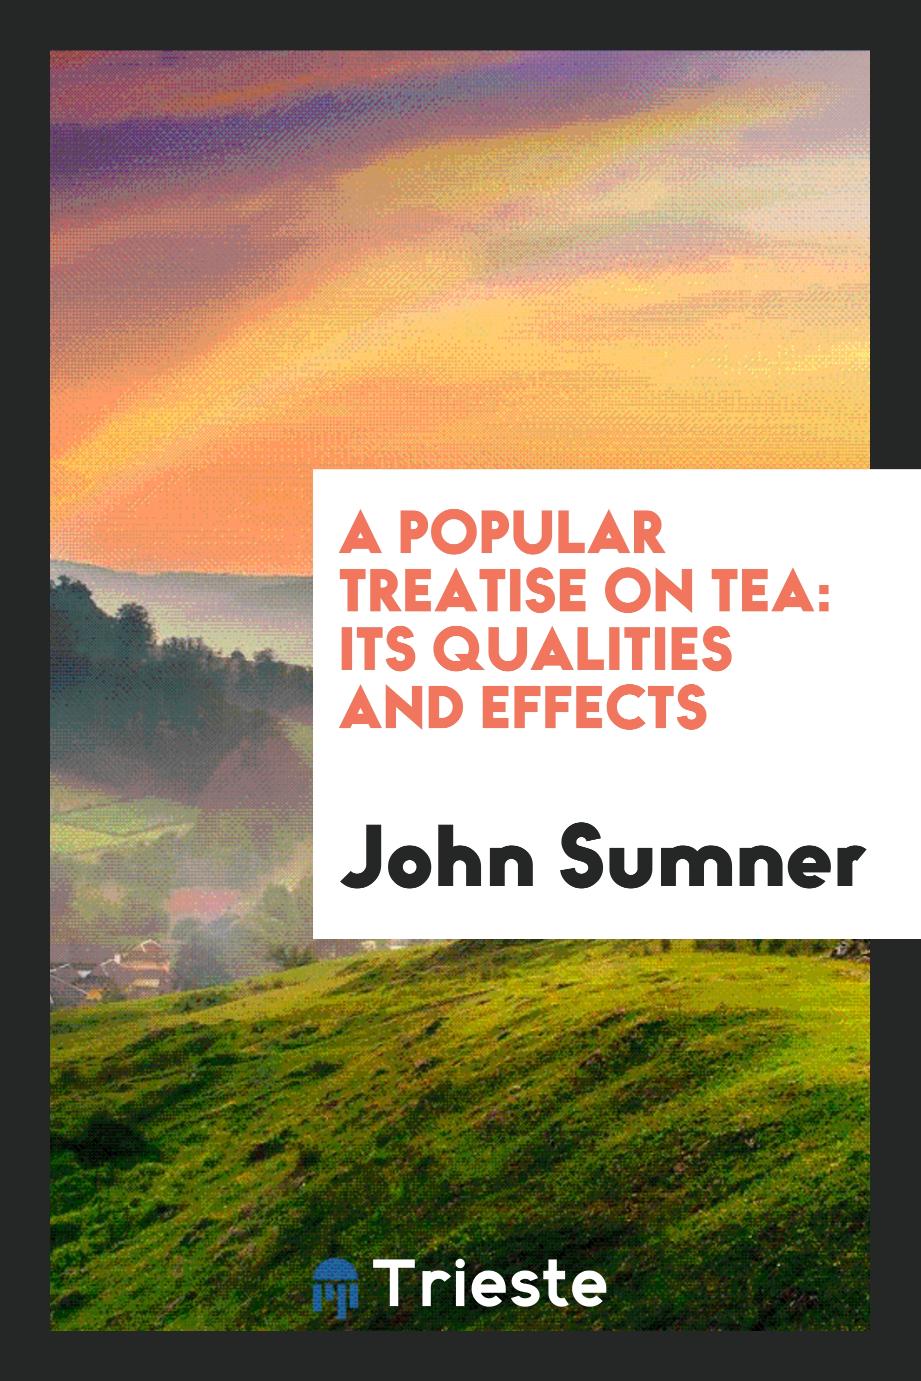 A popular treatise on tea: its qualities and effects